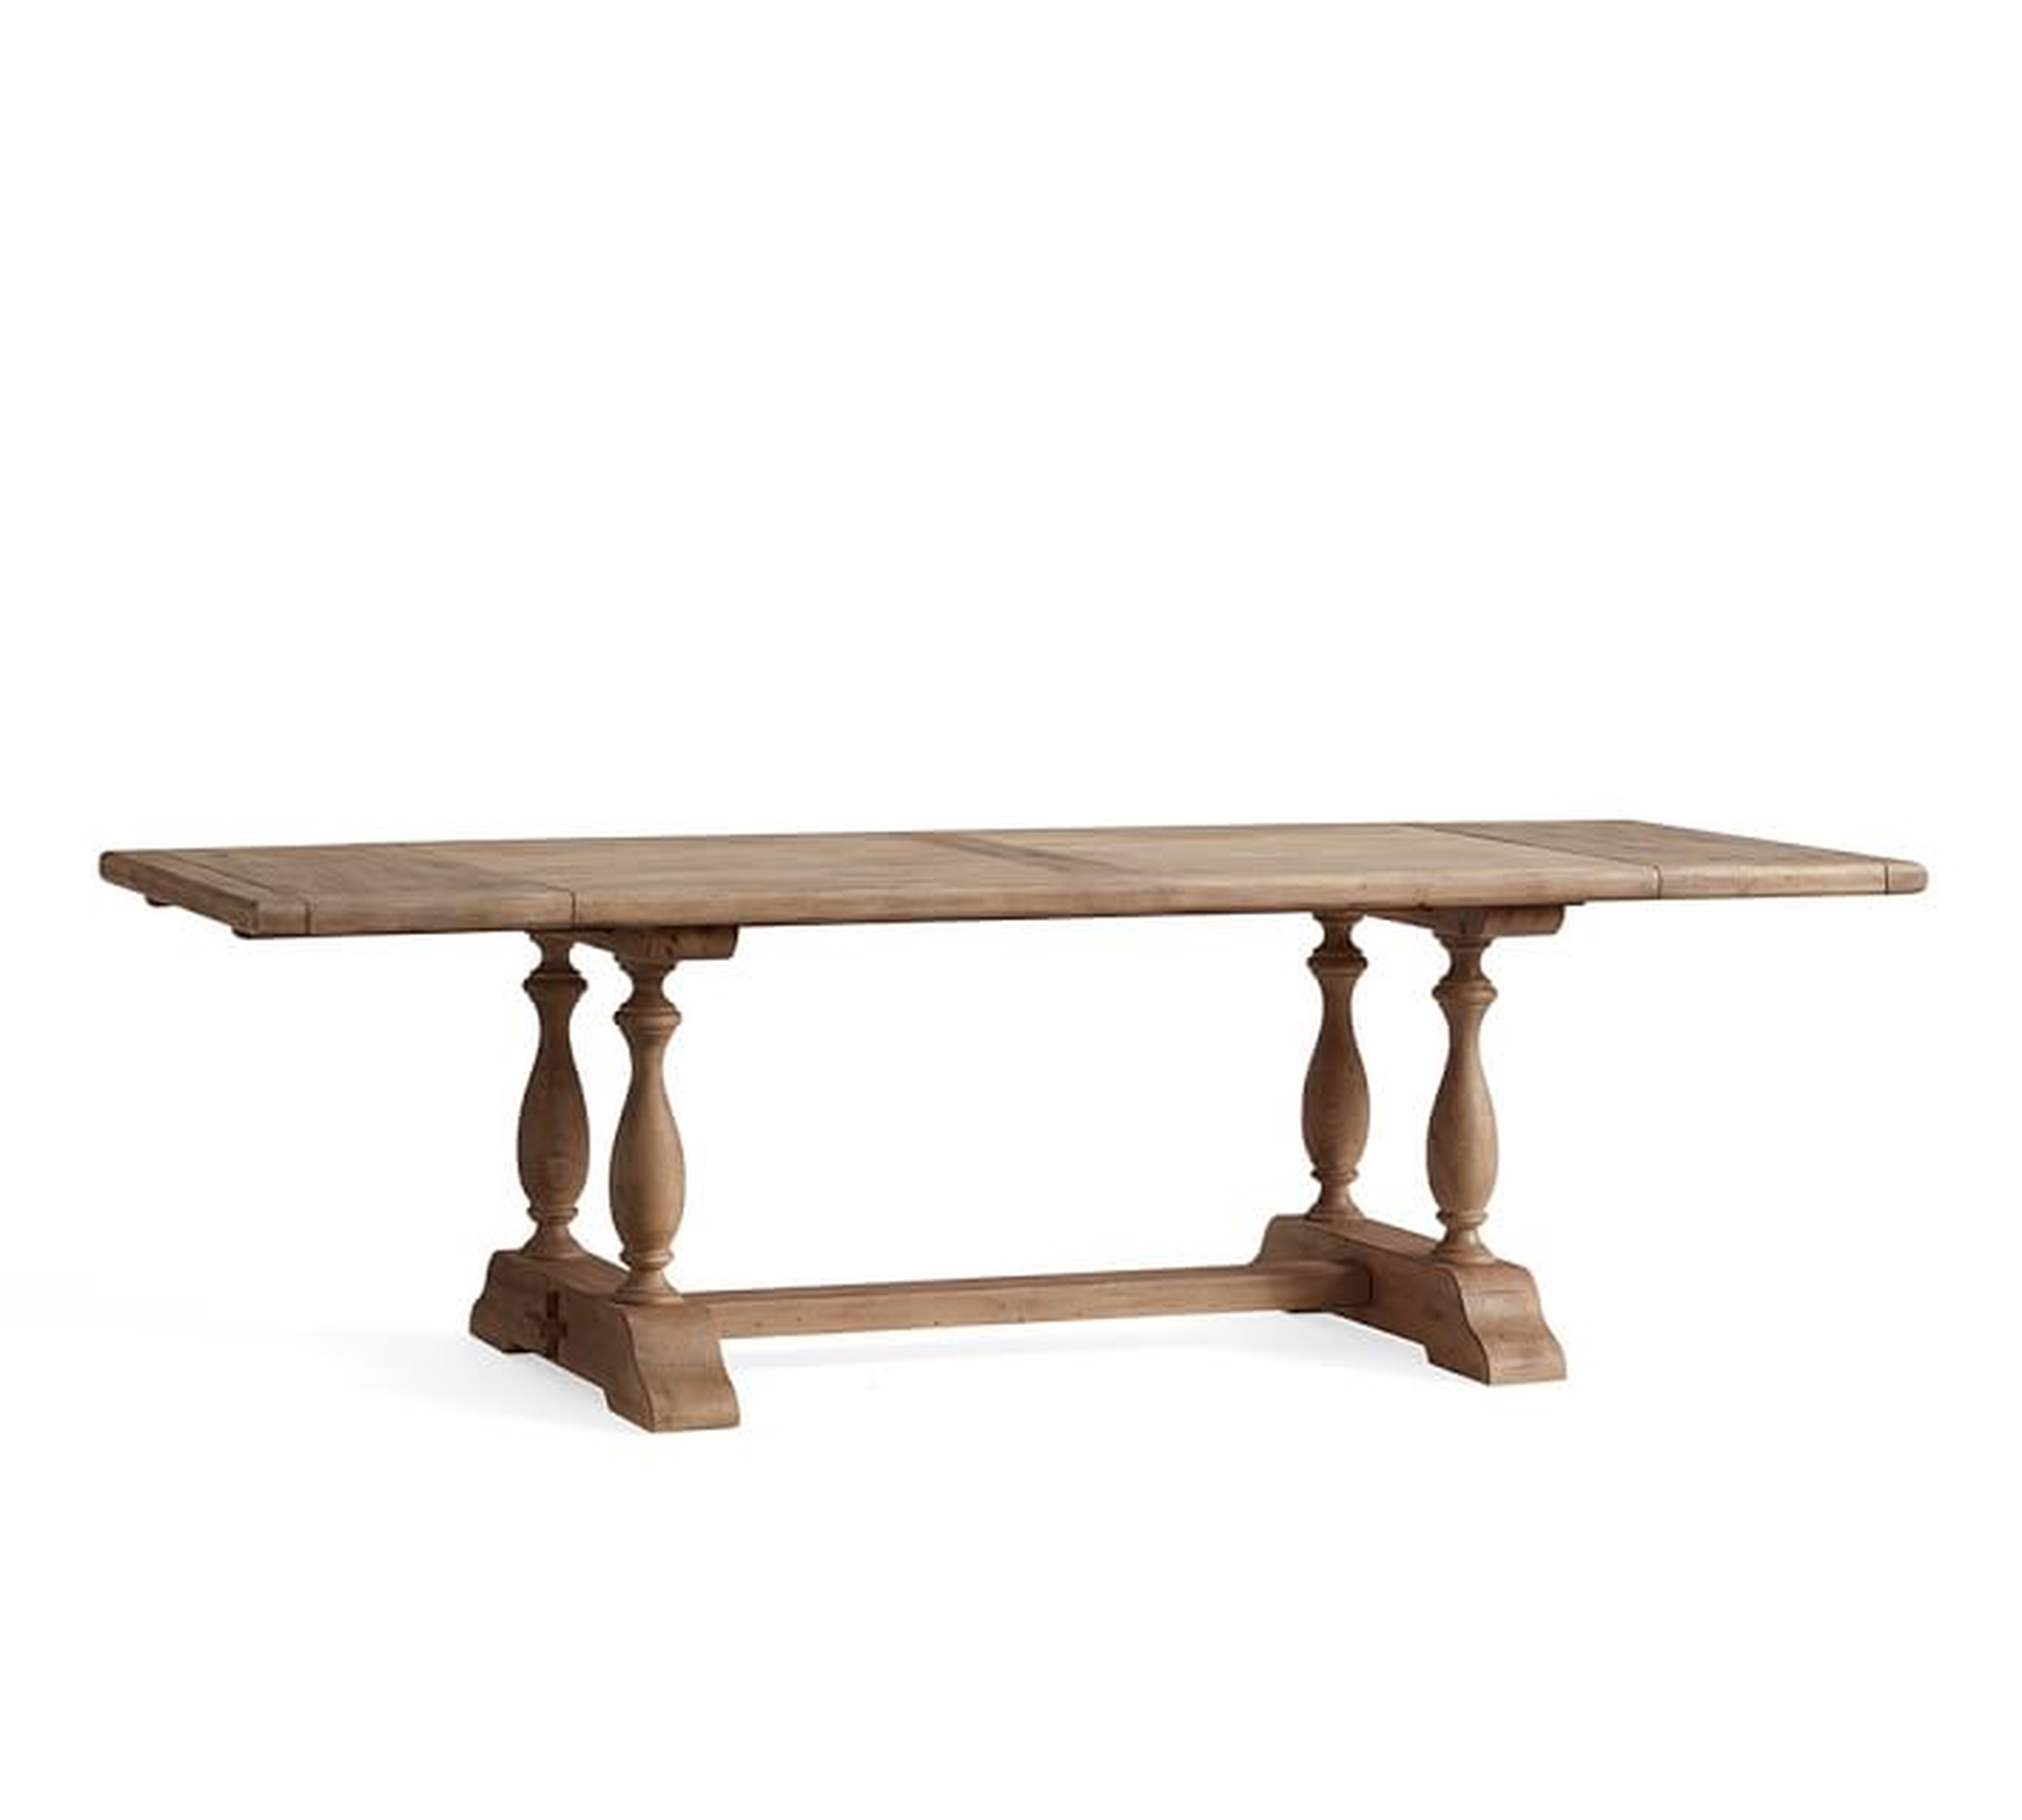 PARKMORE RECLAIMED WOOD EXTENDING DINING TABLE - Pottery Barn